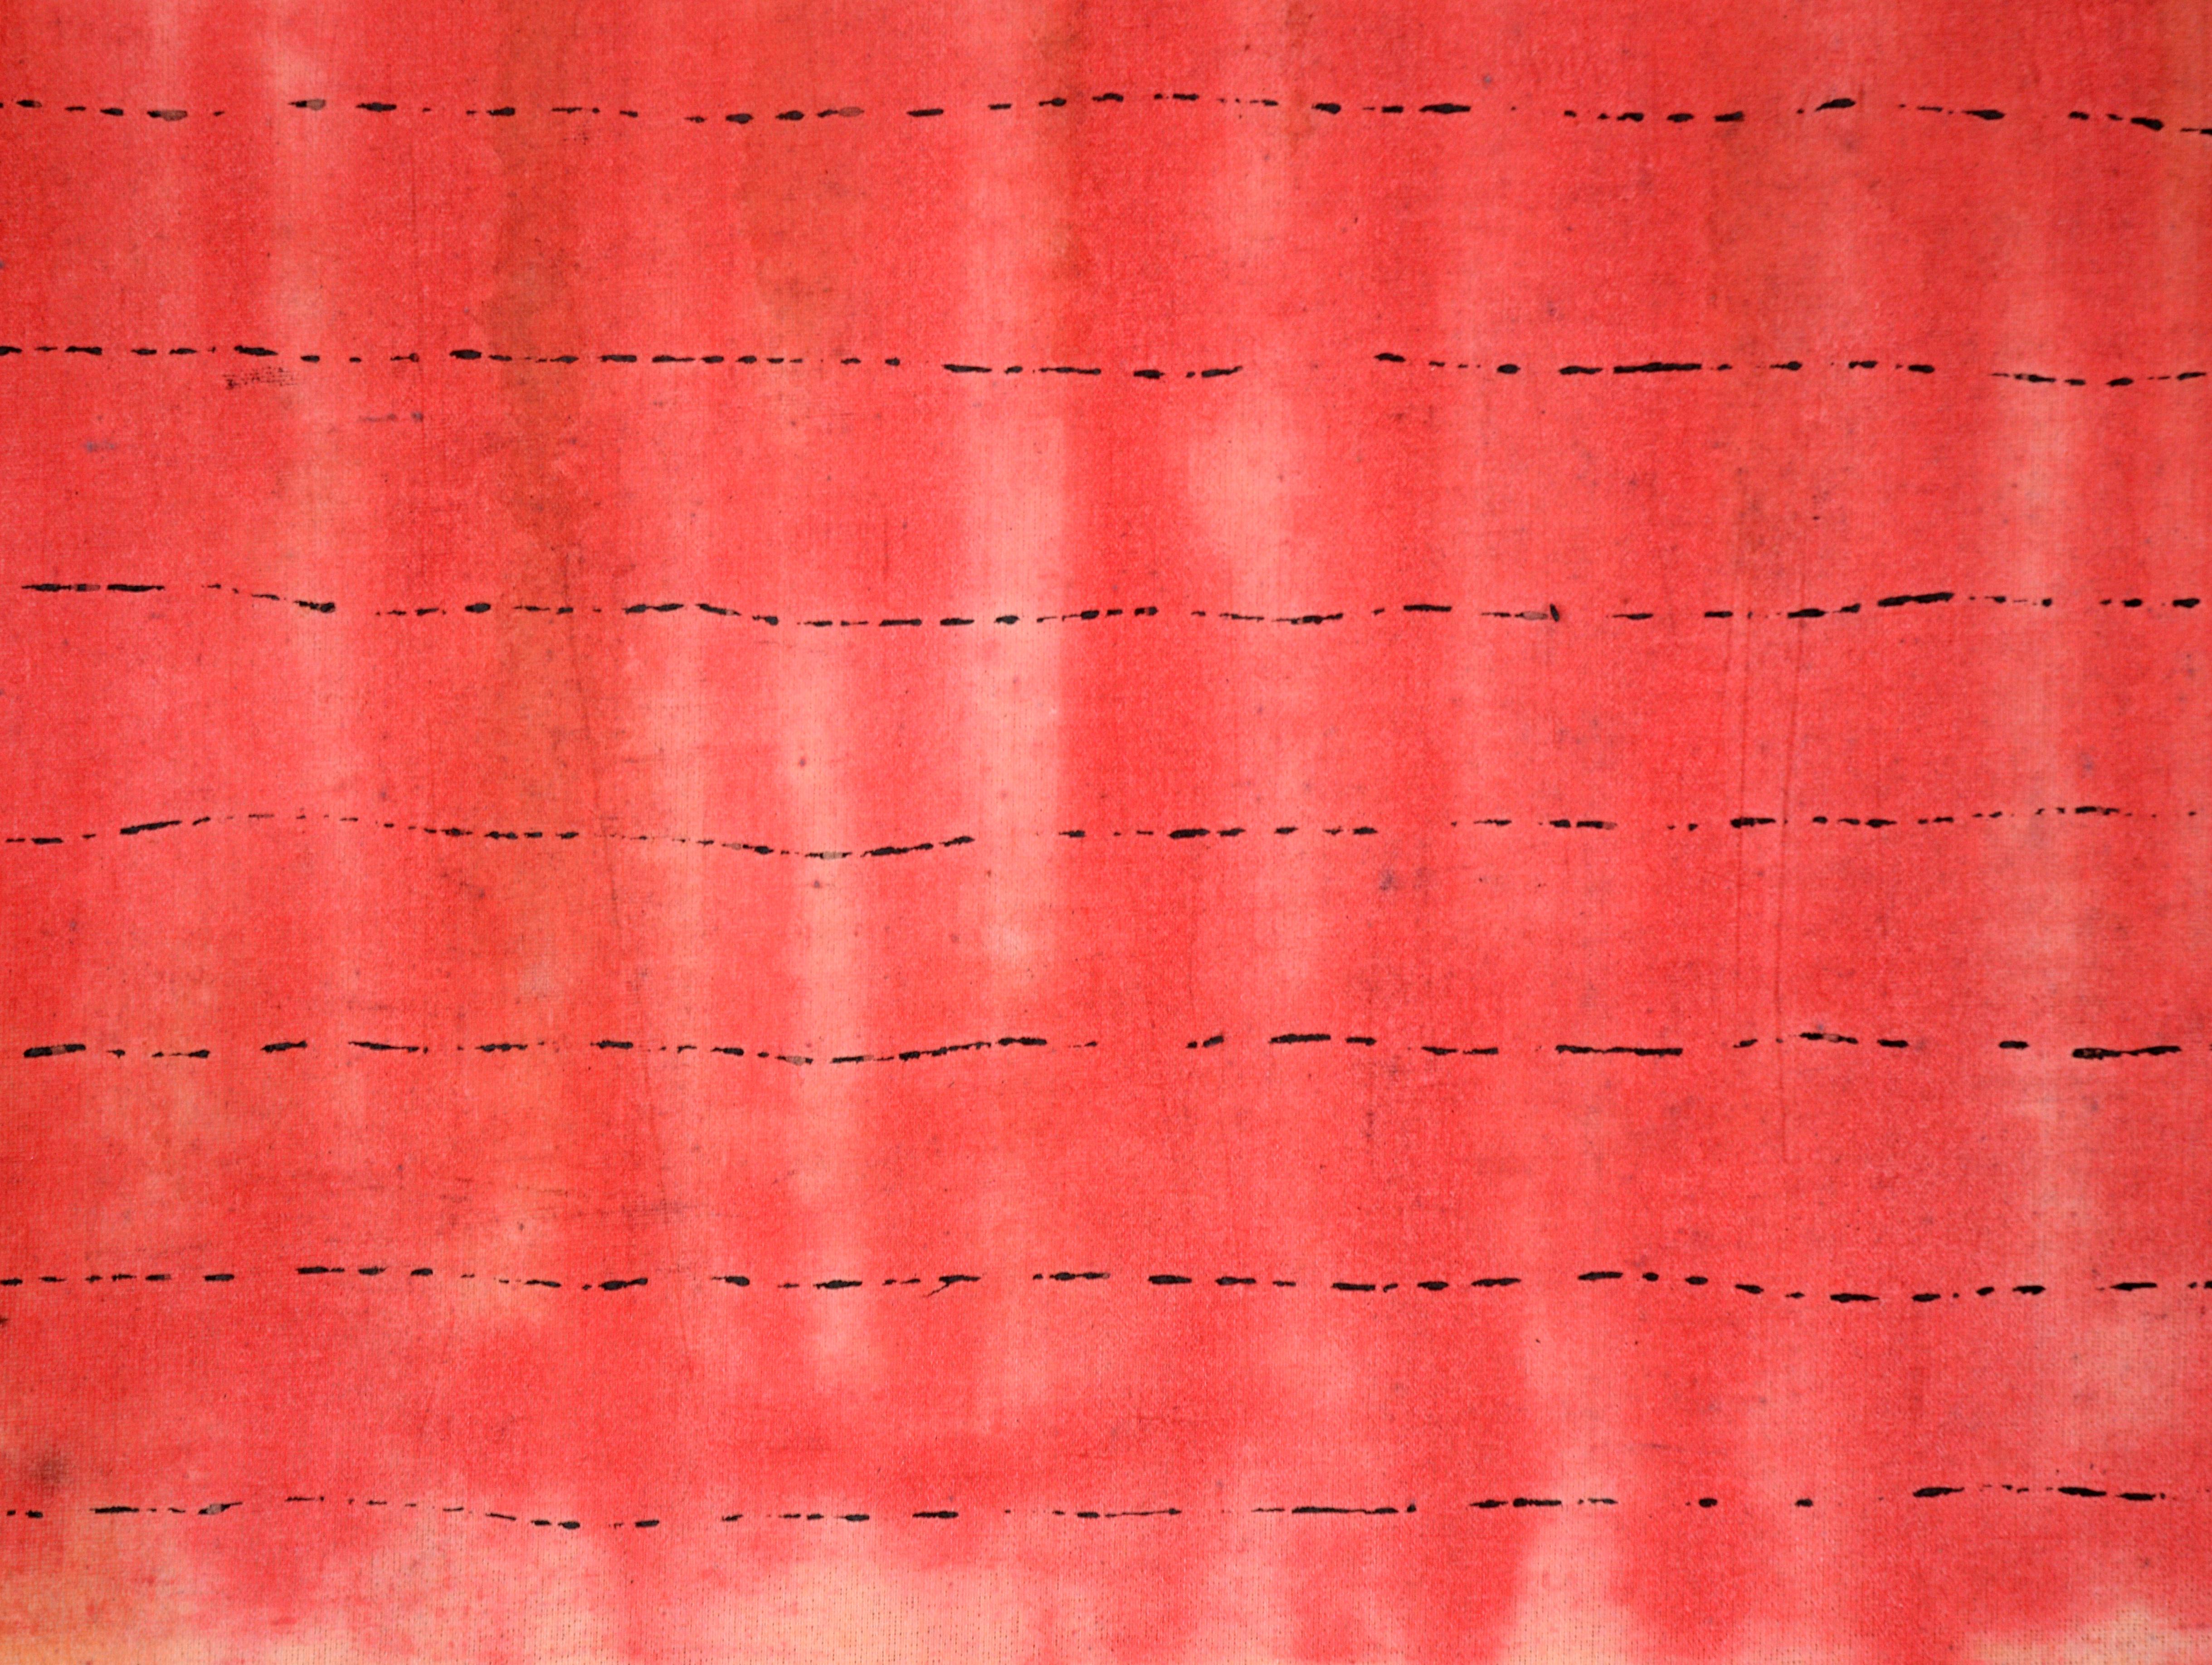 Black Lines Across a Red Field - Abstract Composition on Starched Linen For Sale 1